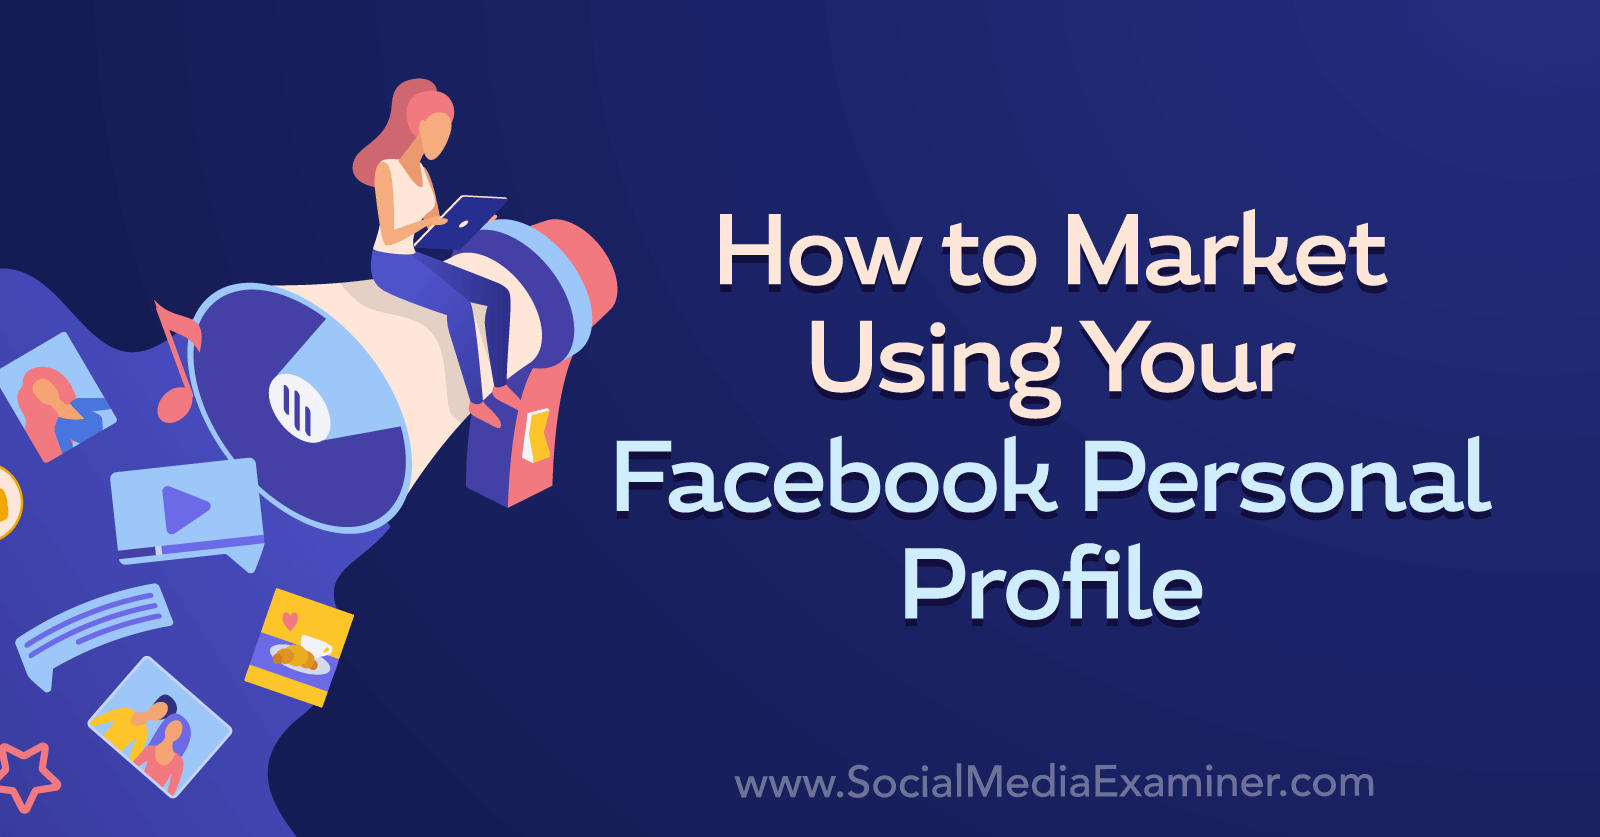  A step-by-step guide to convert your personal Facebook profile into a business profile to promote your brand or services.